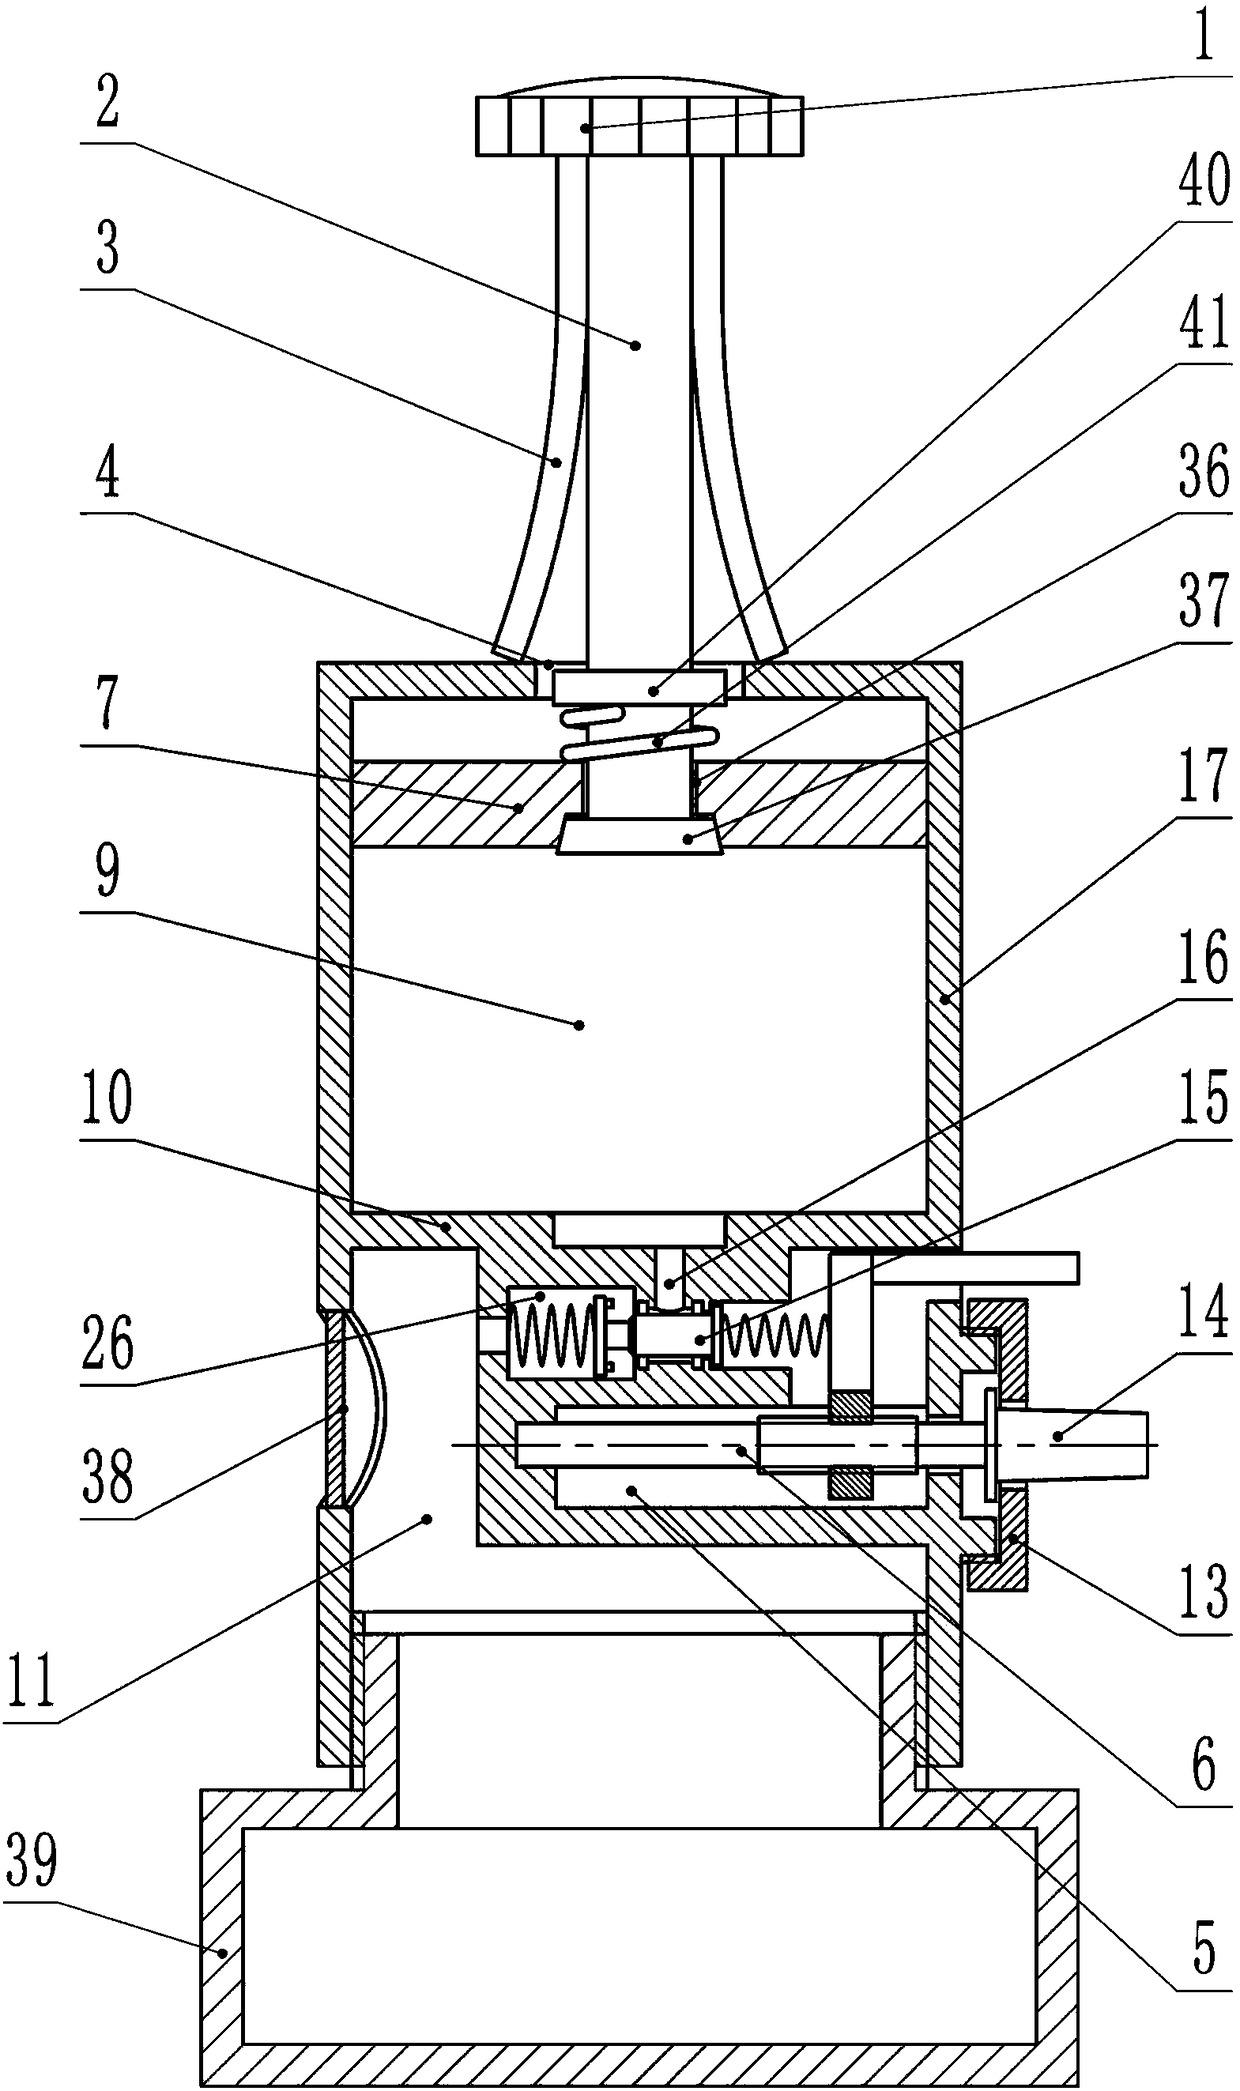 Low pressure seed processing apparatus